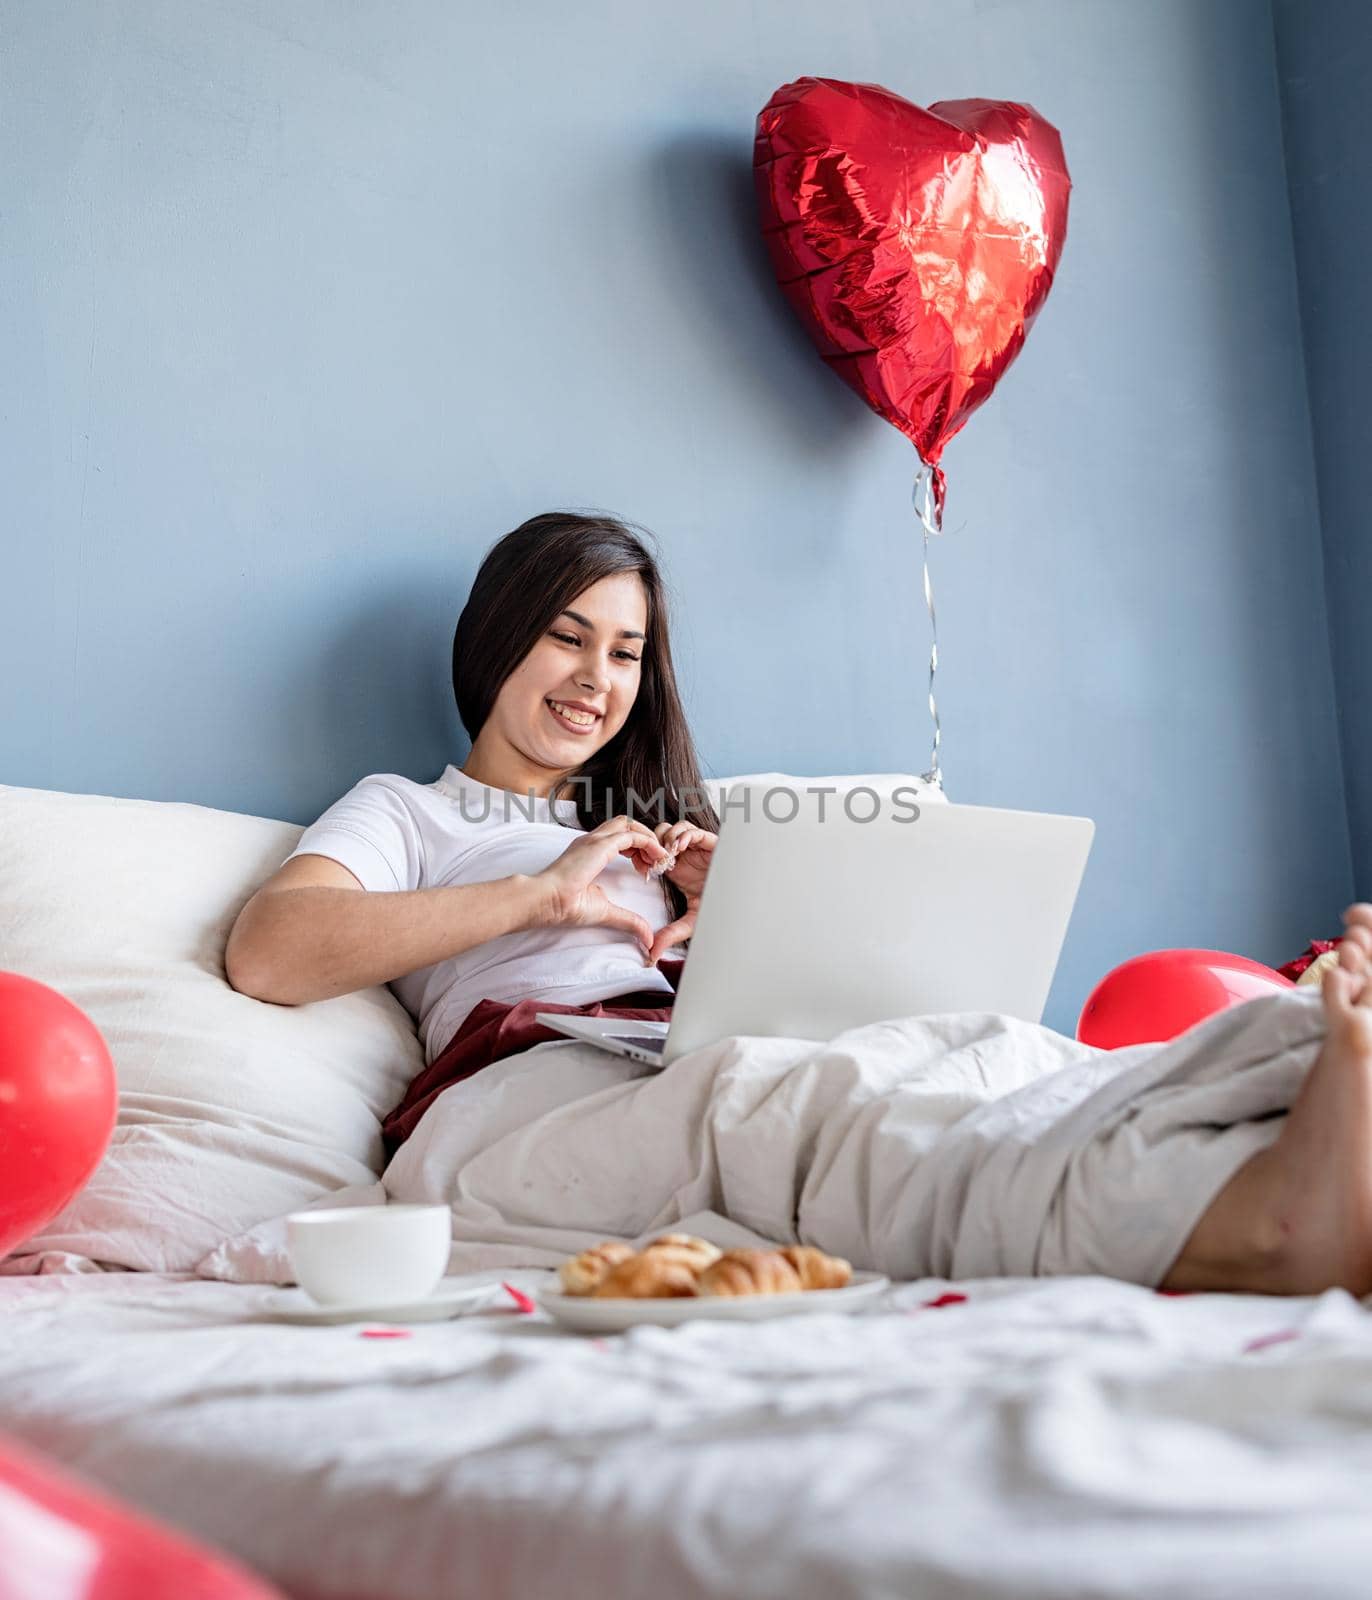 Young happy brunette woman sitting in the bed with red heart shaped balloons chatting with her boyfriend on laptop showing heart gesture with hands by Desperada